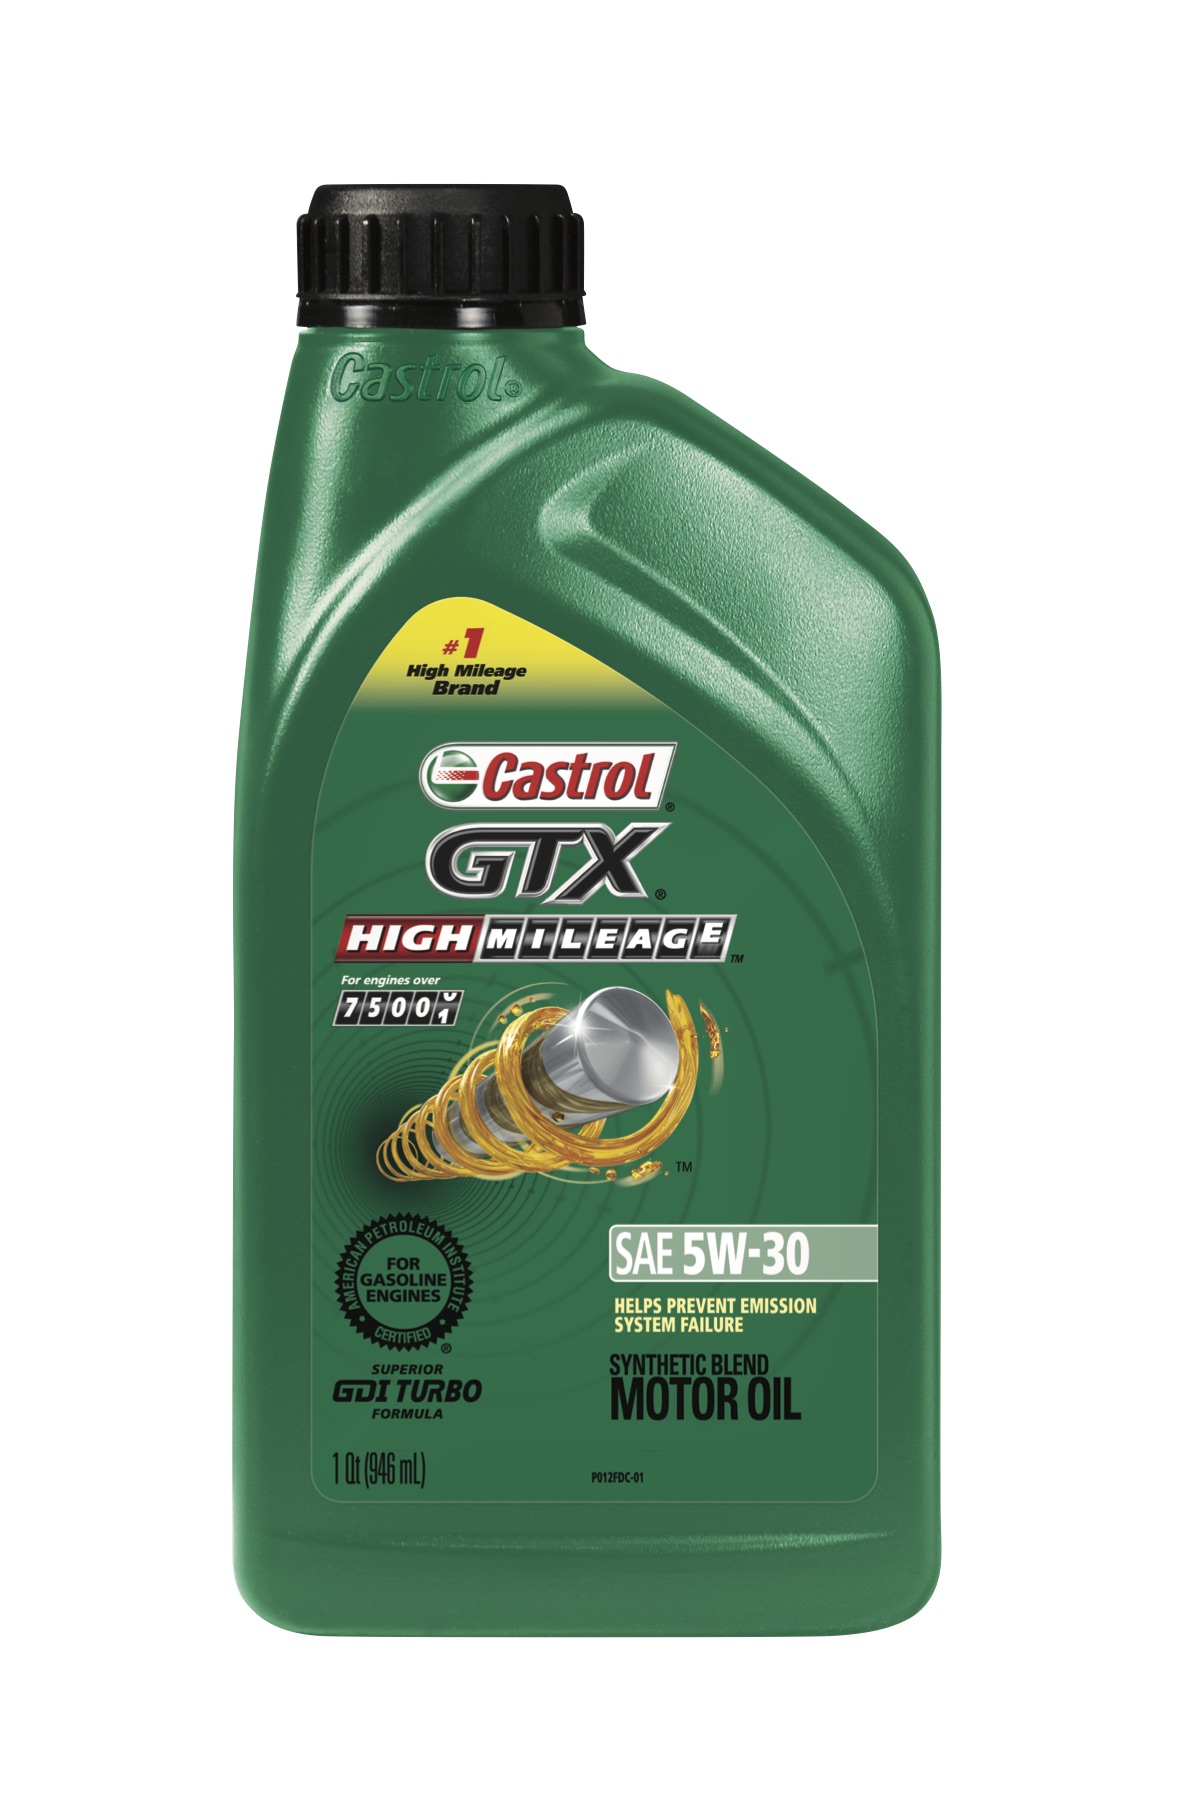 Castrol GTX High Mileage 5W-30 Synthetic Blend Motor India